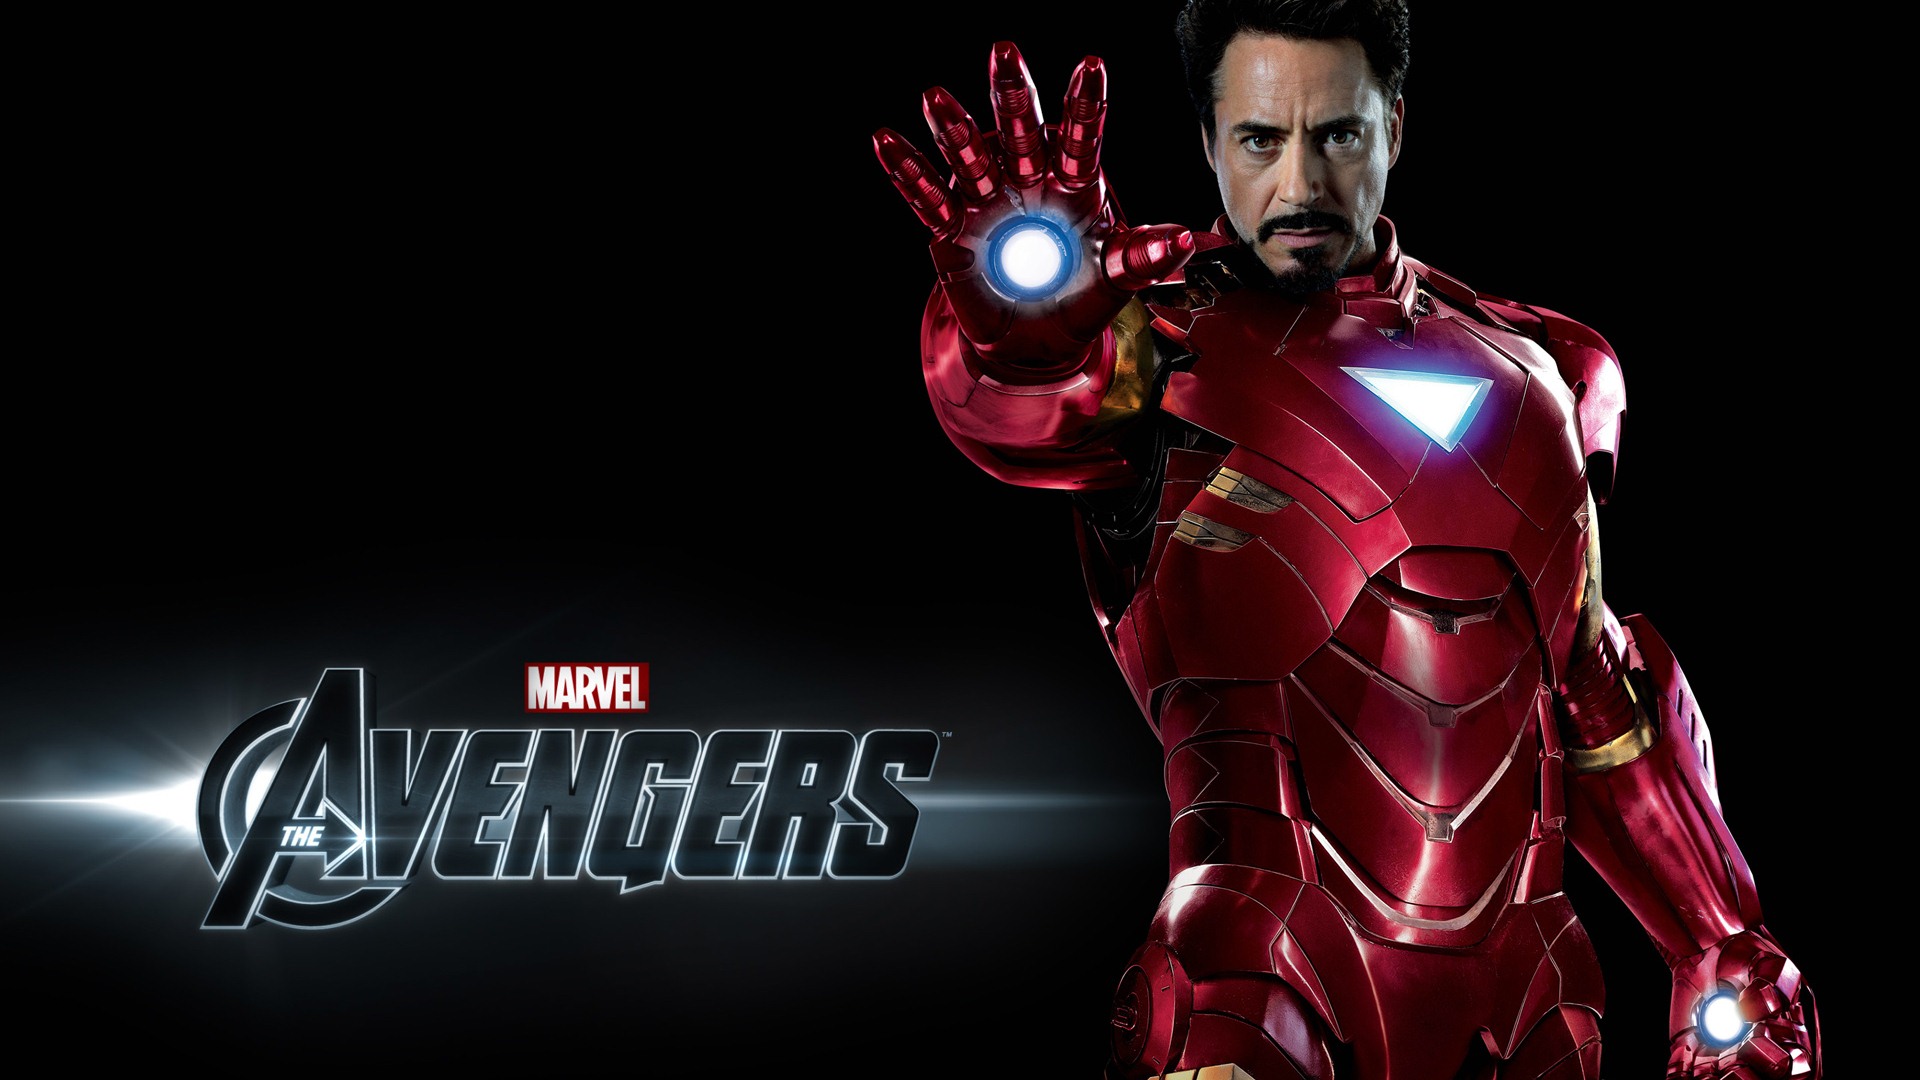 The Avengers 2012 HD wallpapers #7 - 1920x1080